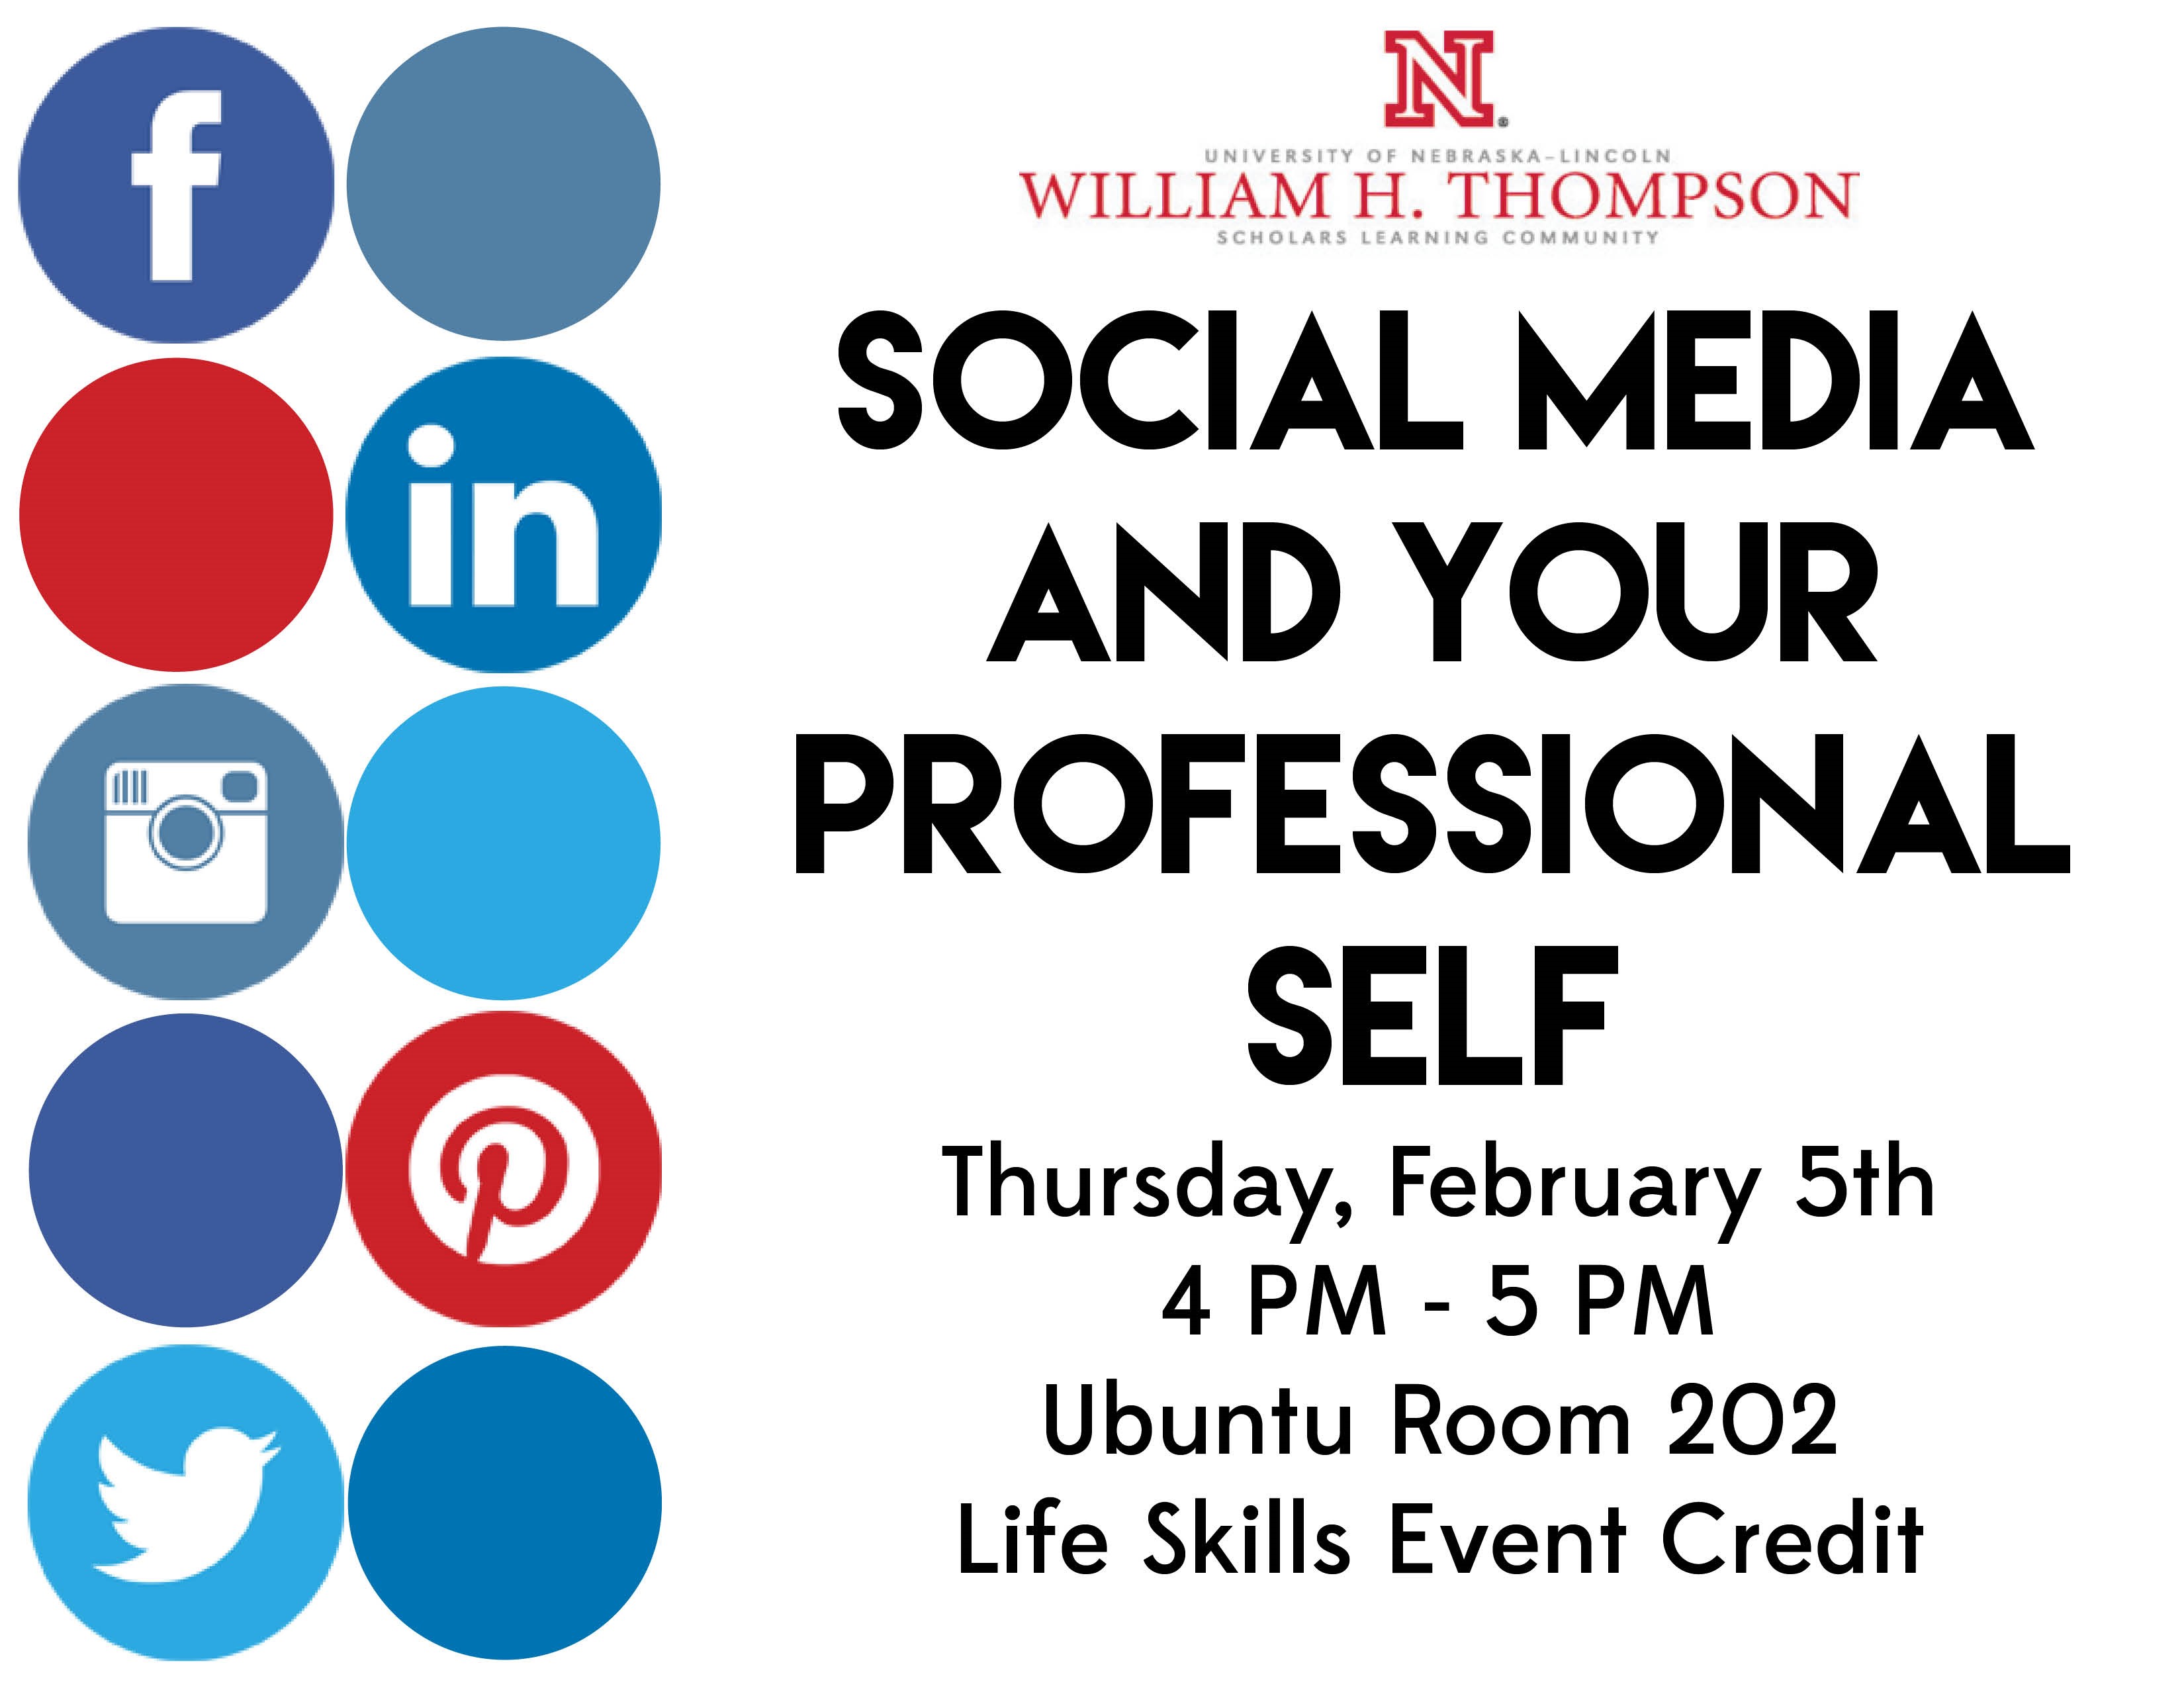 Social Media and Your Professional Self